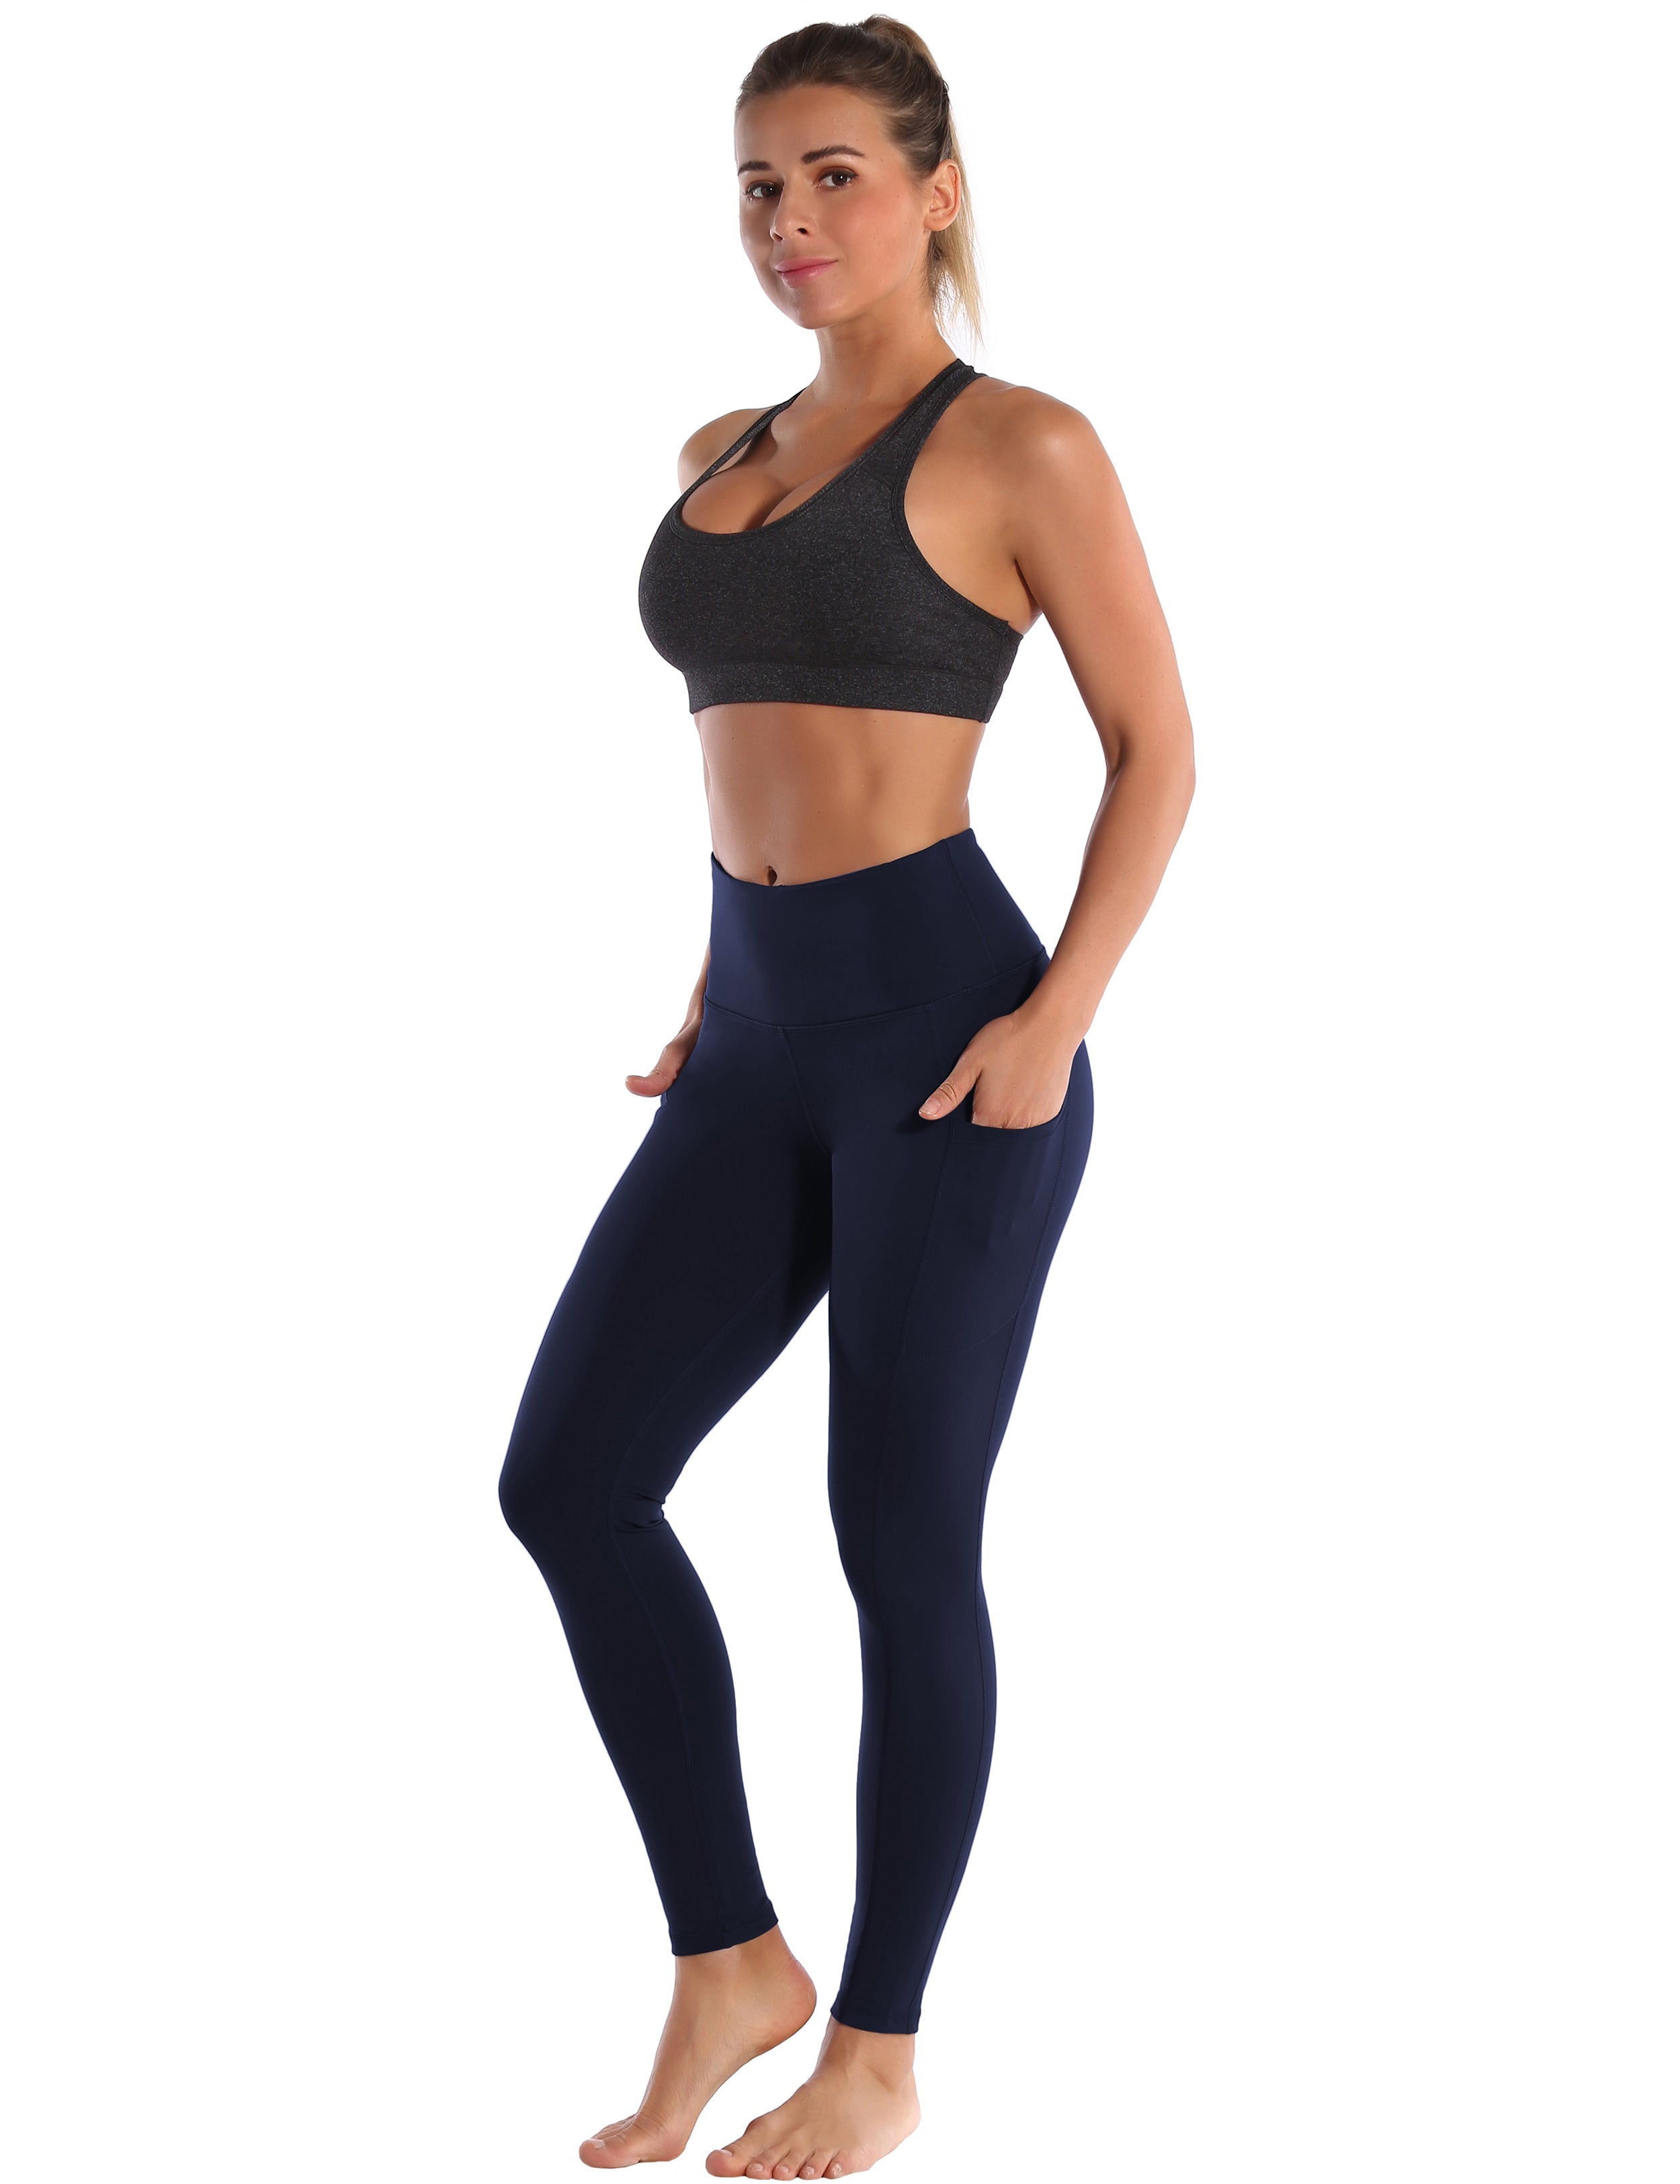 Hip Line Side Pockets Golf Pants darknavy Sexy Hip Line Side Pockets 75%Nylon/25%Spandex Fabric doesn't attract lint easily 4-way stretch No see-through Moisture-wicking Tummy control Inner pocket Two lengths